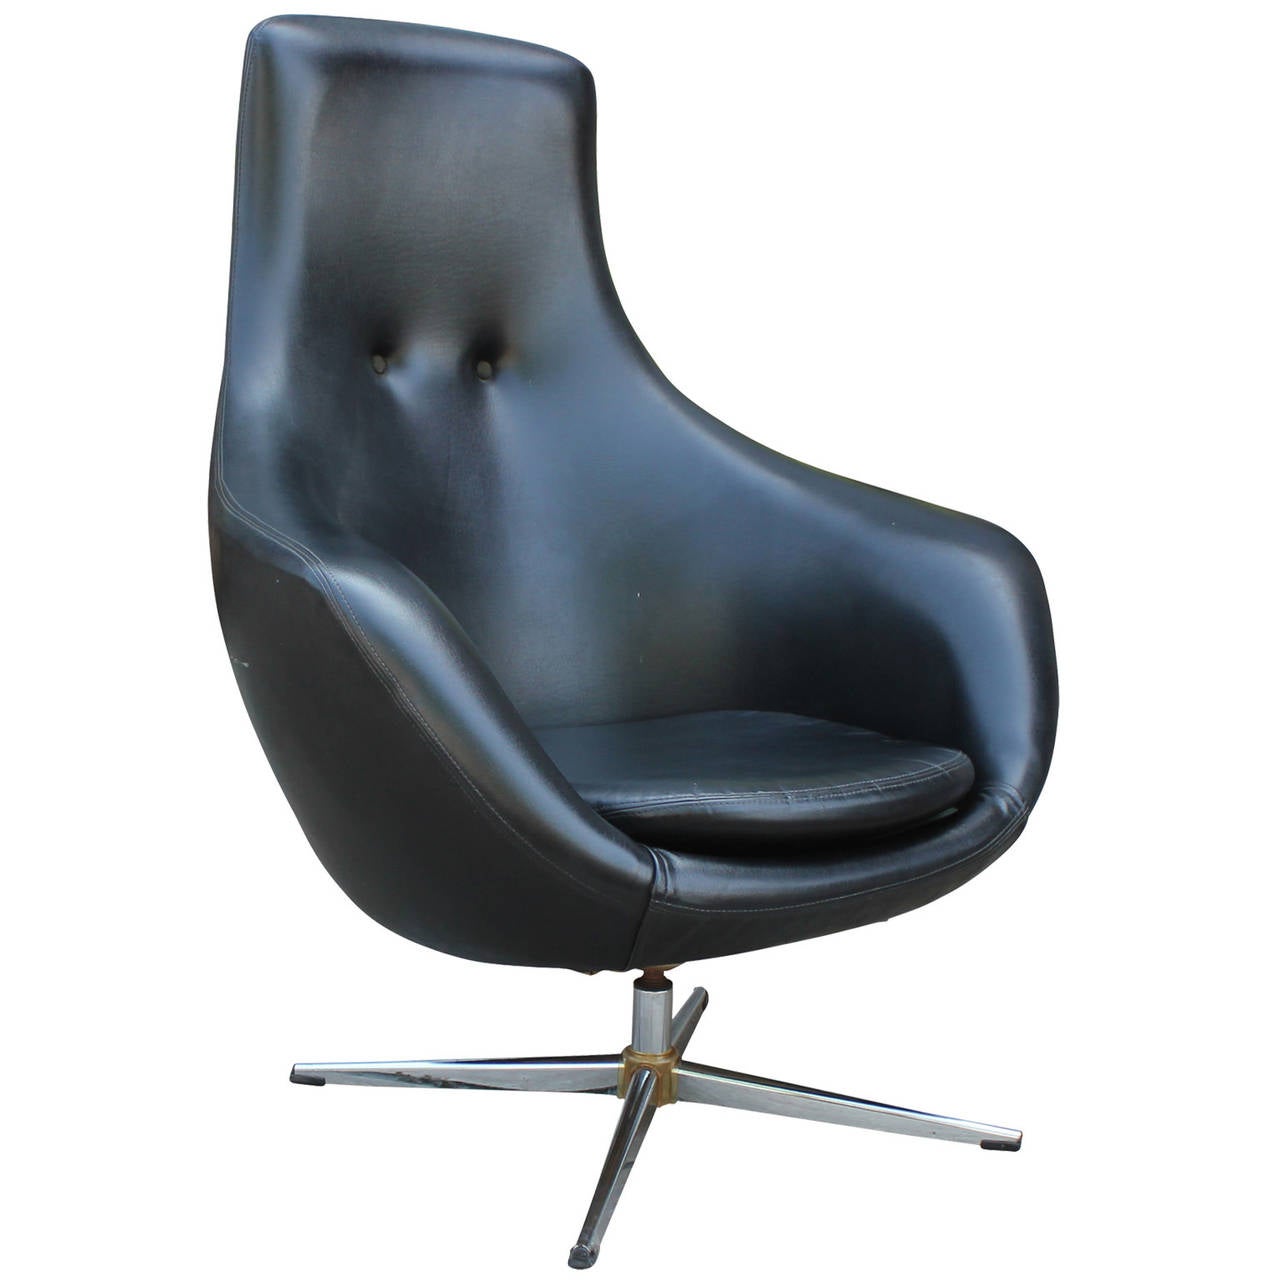 Wonderful egg style swivel chair in original black vinyl. Chair has an organic shape with swooping, rounded lines. Seat black is tufted with two buttons. Four legged base is chrome plated. In nice vintage condition.